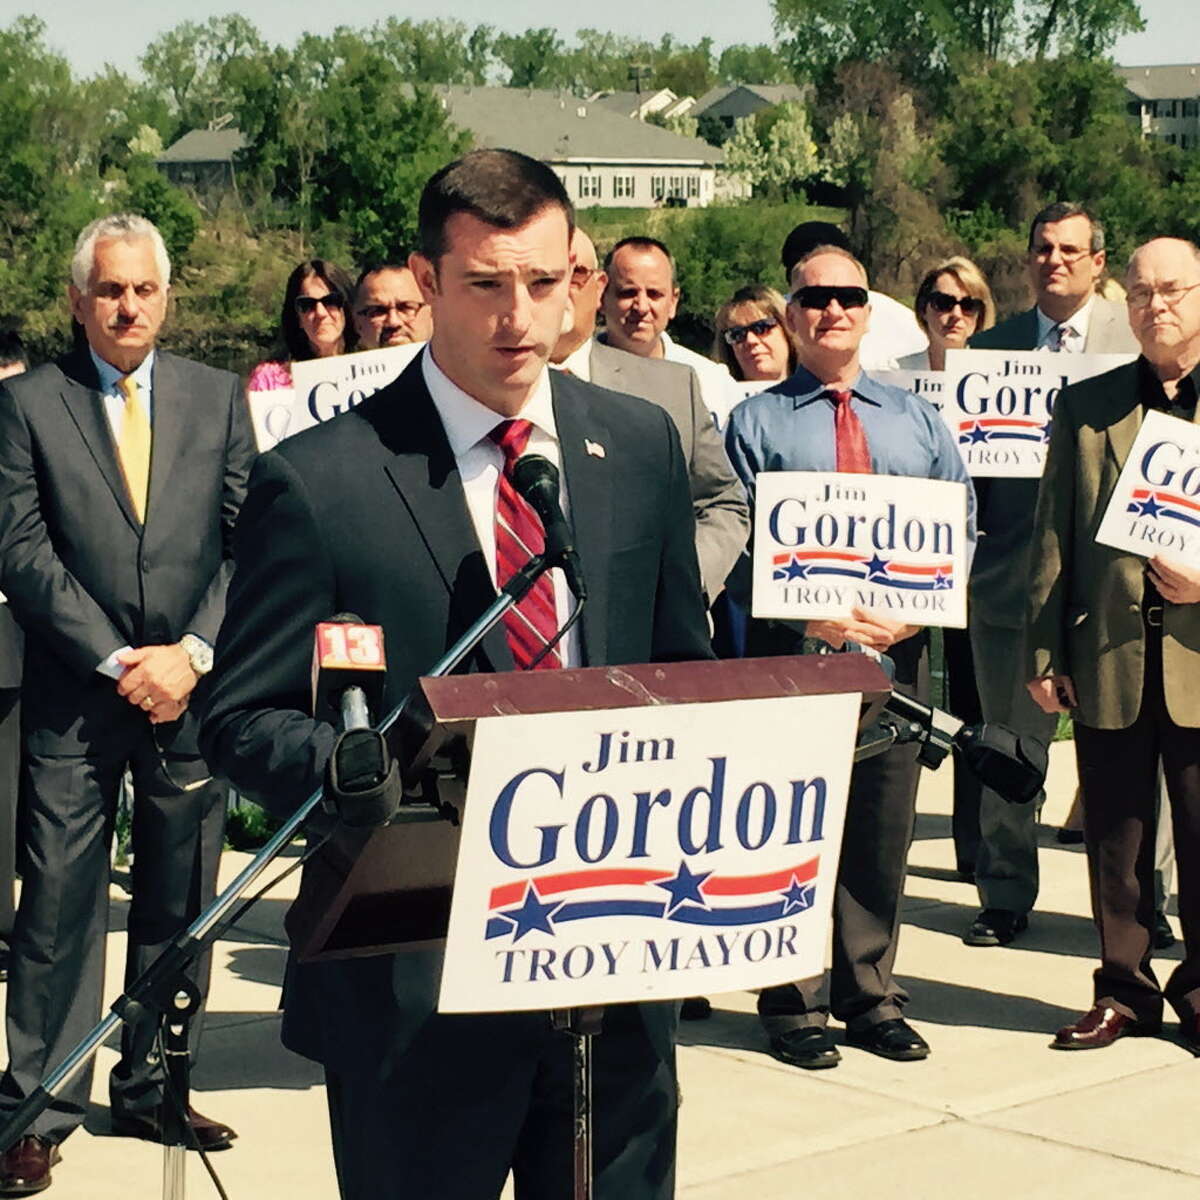 Troy City Councilman Jim Gordon announces on May 7, 2015, that he is a Republican candidate for Troy mayor. (Kenneth C. Crowe II/Times Union)